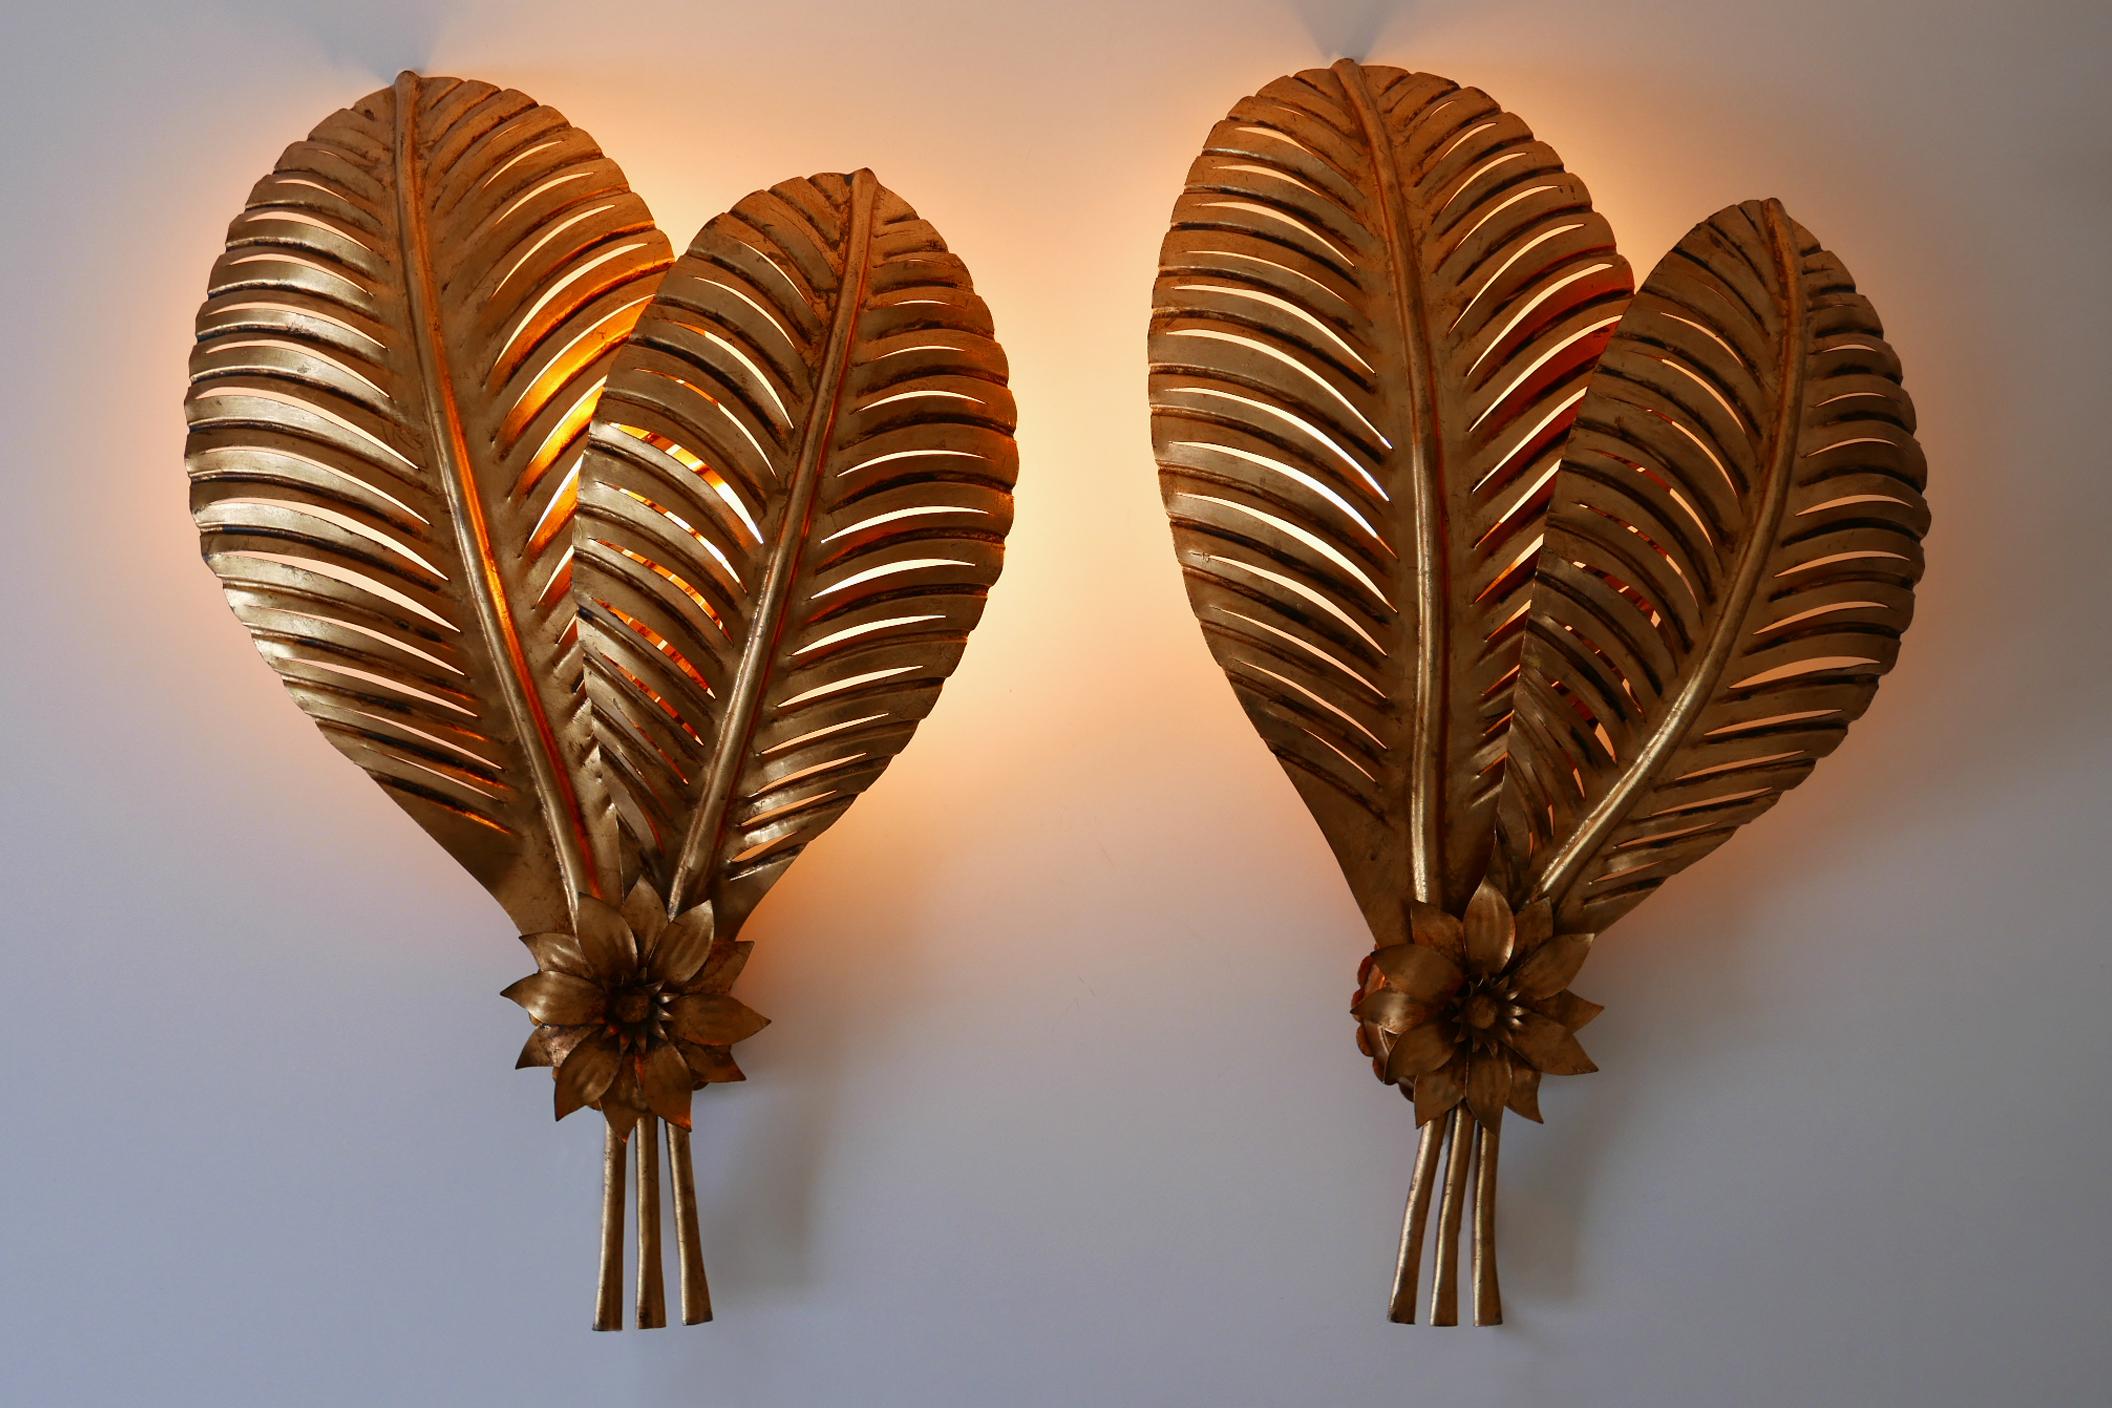 Set of two exceptional and large Mid-Century Modern palm leaf wall lamps or sconces. Designed and manufactured by Hans Kögl, 1970s, Germany.

Executed in gilt and perforated metal sheet and tubes, each lamp comes with 2 x E27 Edison screw fit bulb